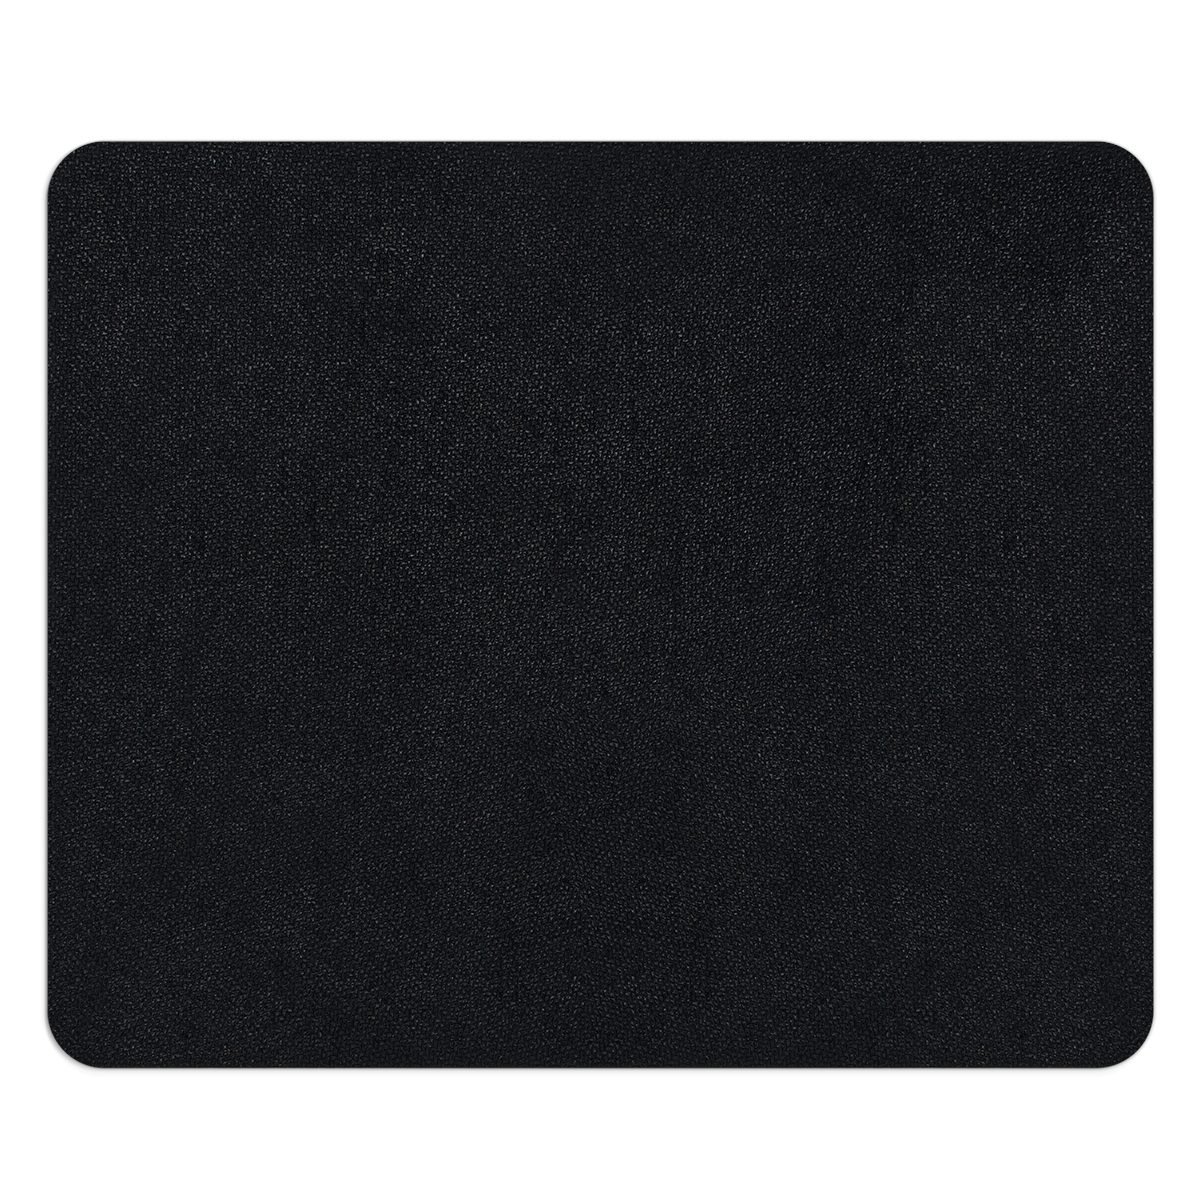 XIII Minutes – Blue Flame Mousepads